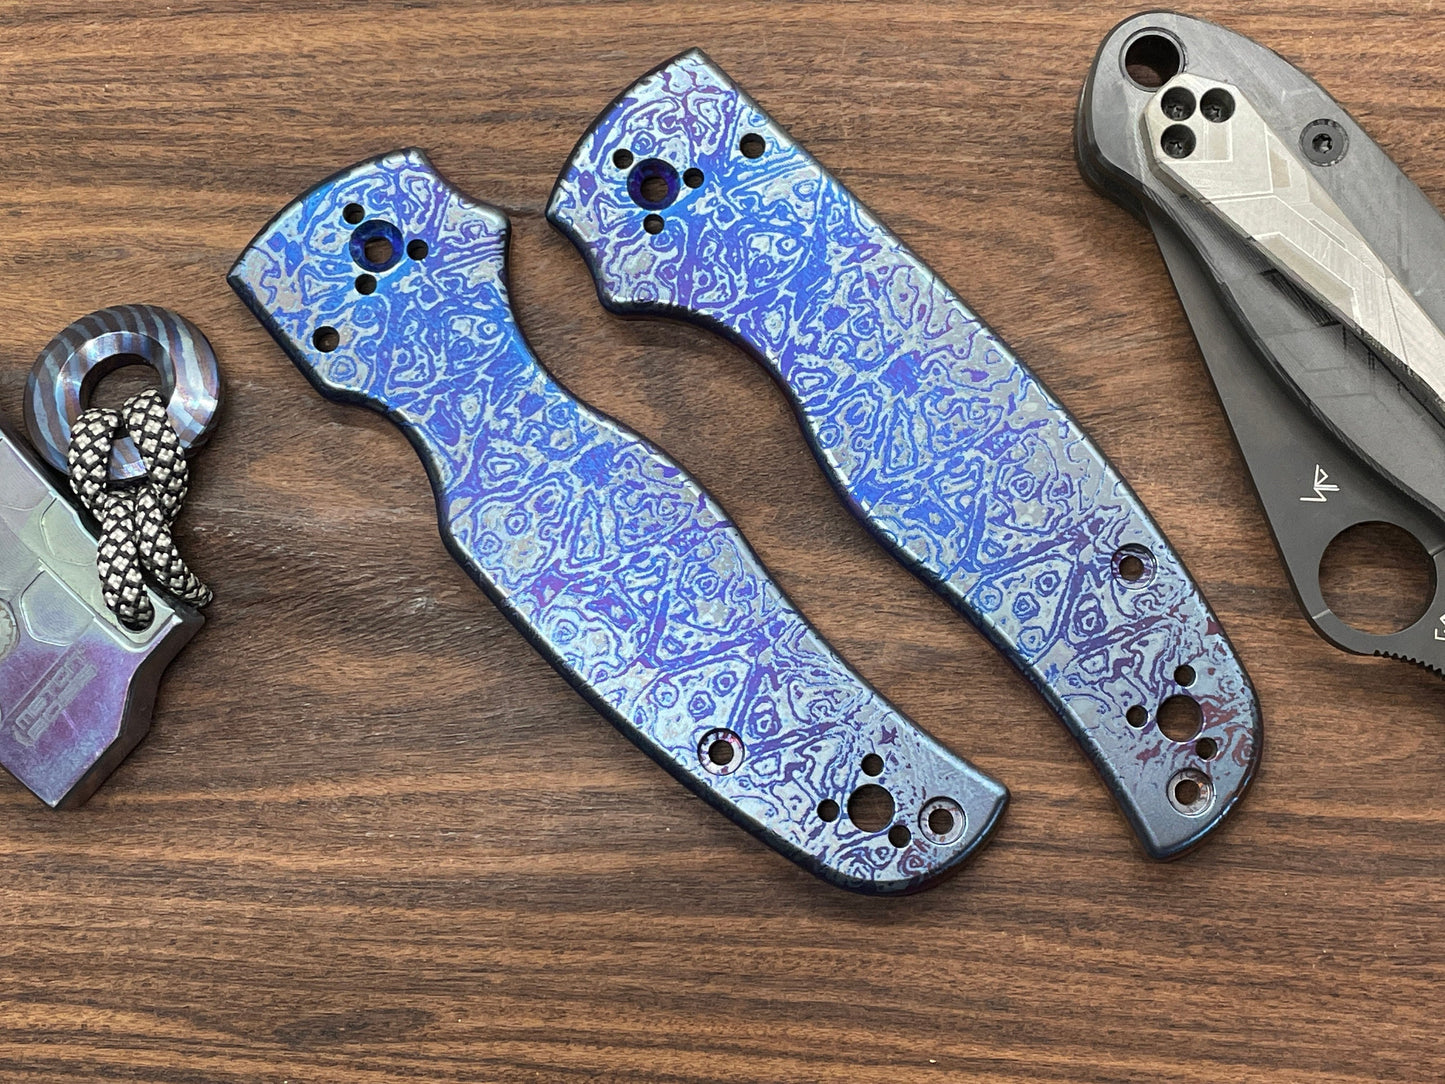 Blue Flamed ALIEN heat ano engraved Titanium Scales for SHAMAN Spyderco